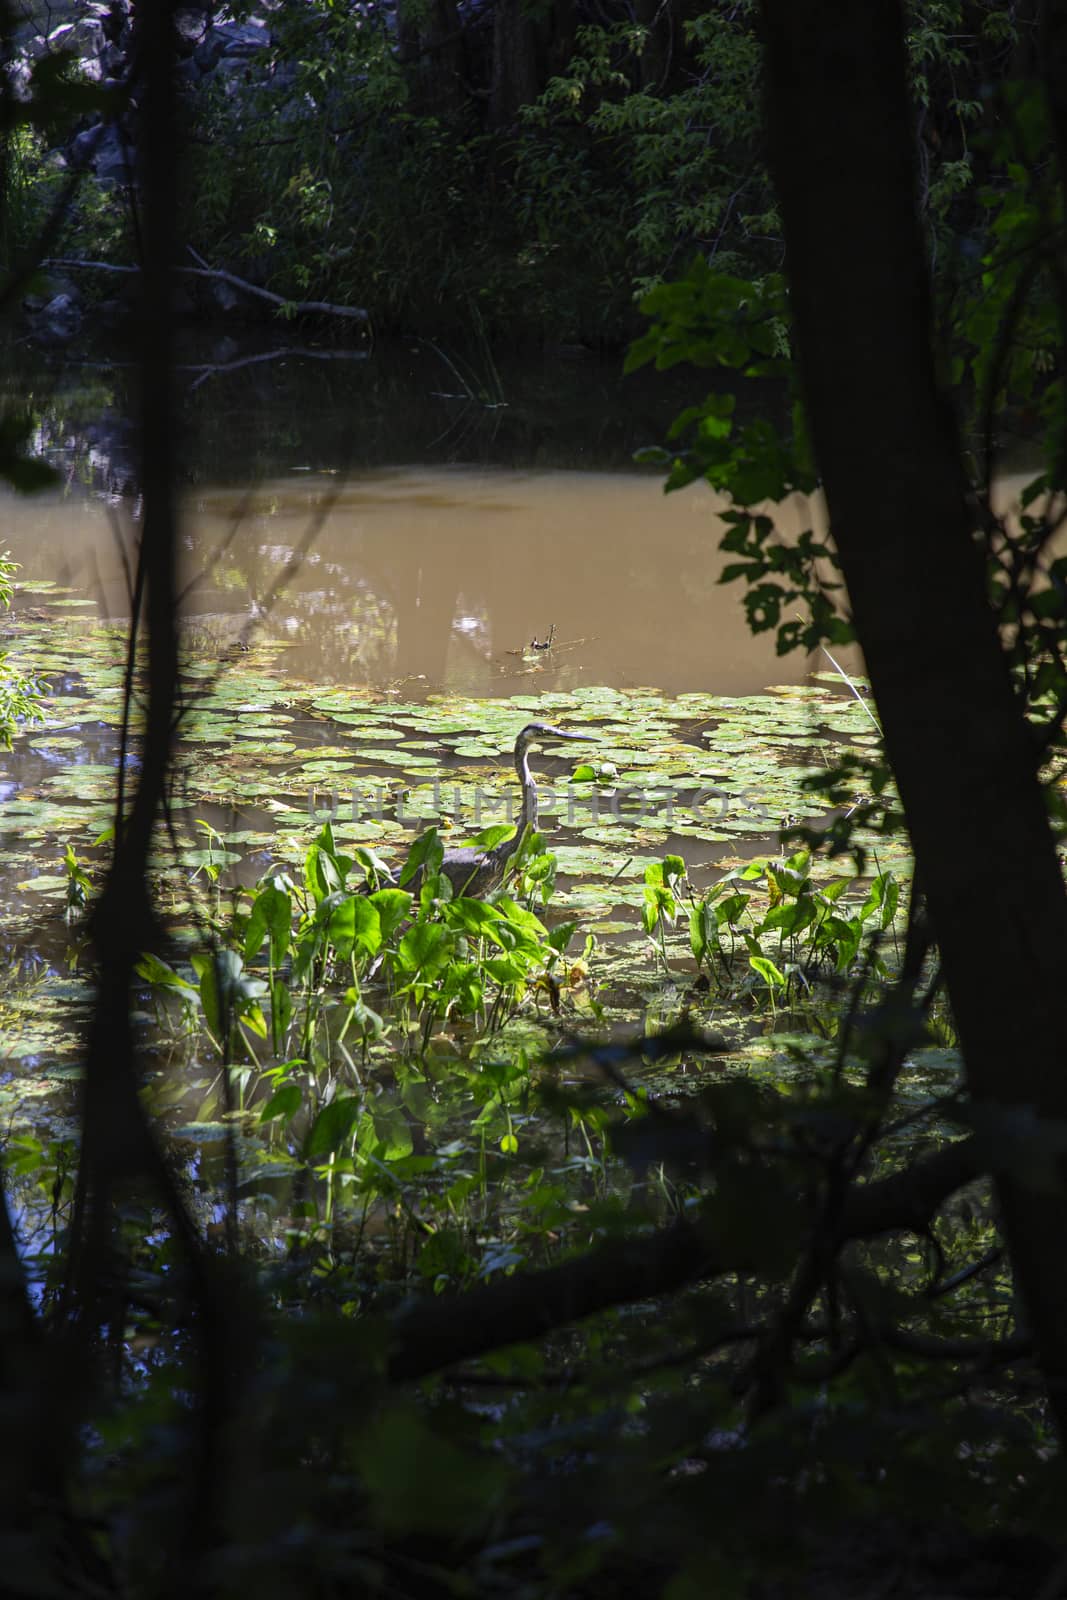 Blue heron, in a marsh, surrounded by lilipad, hunting for frogs